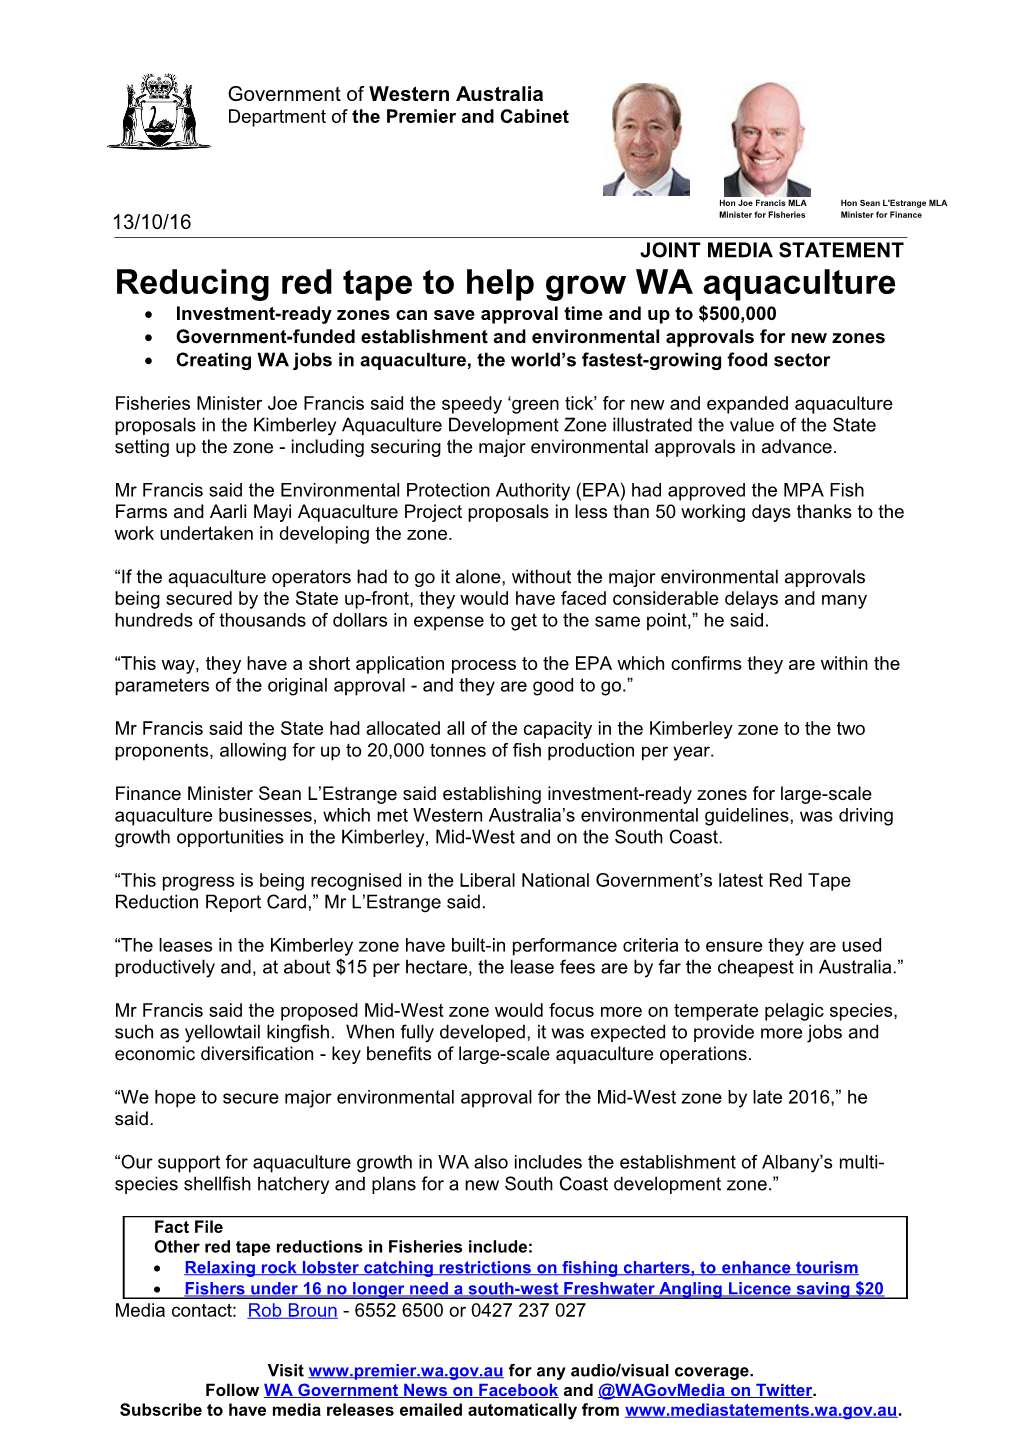 Submission DR105 - Attachment 1: WA Fisheries Minister Media Release - Reducing Red Tape